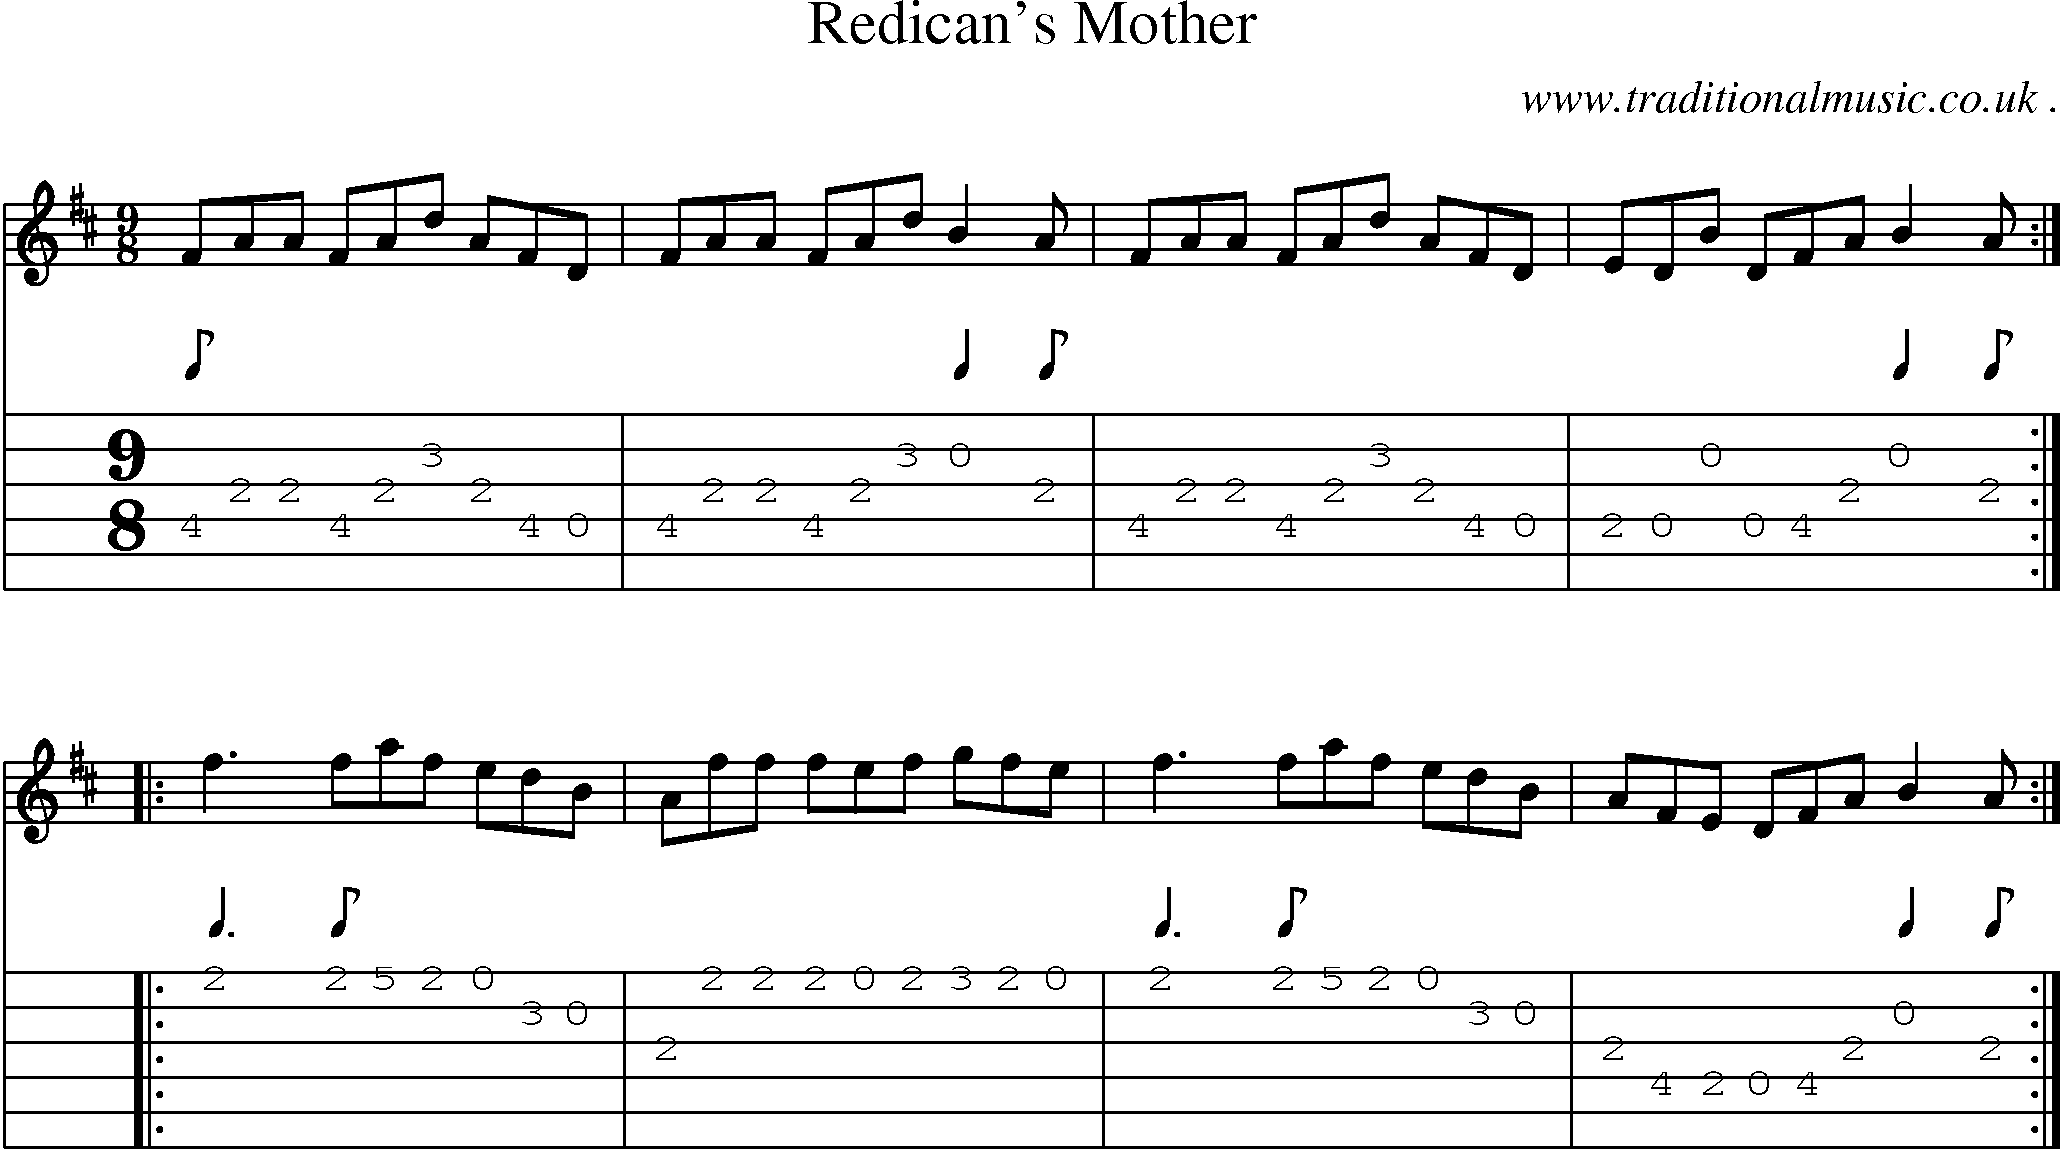 Sheet-Music and Guitar Tabs for Redicans Mother